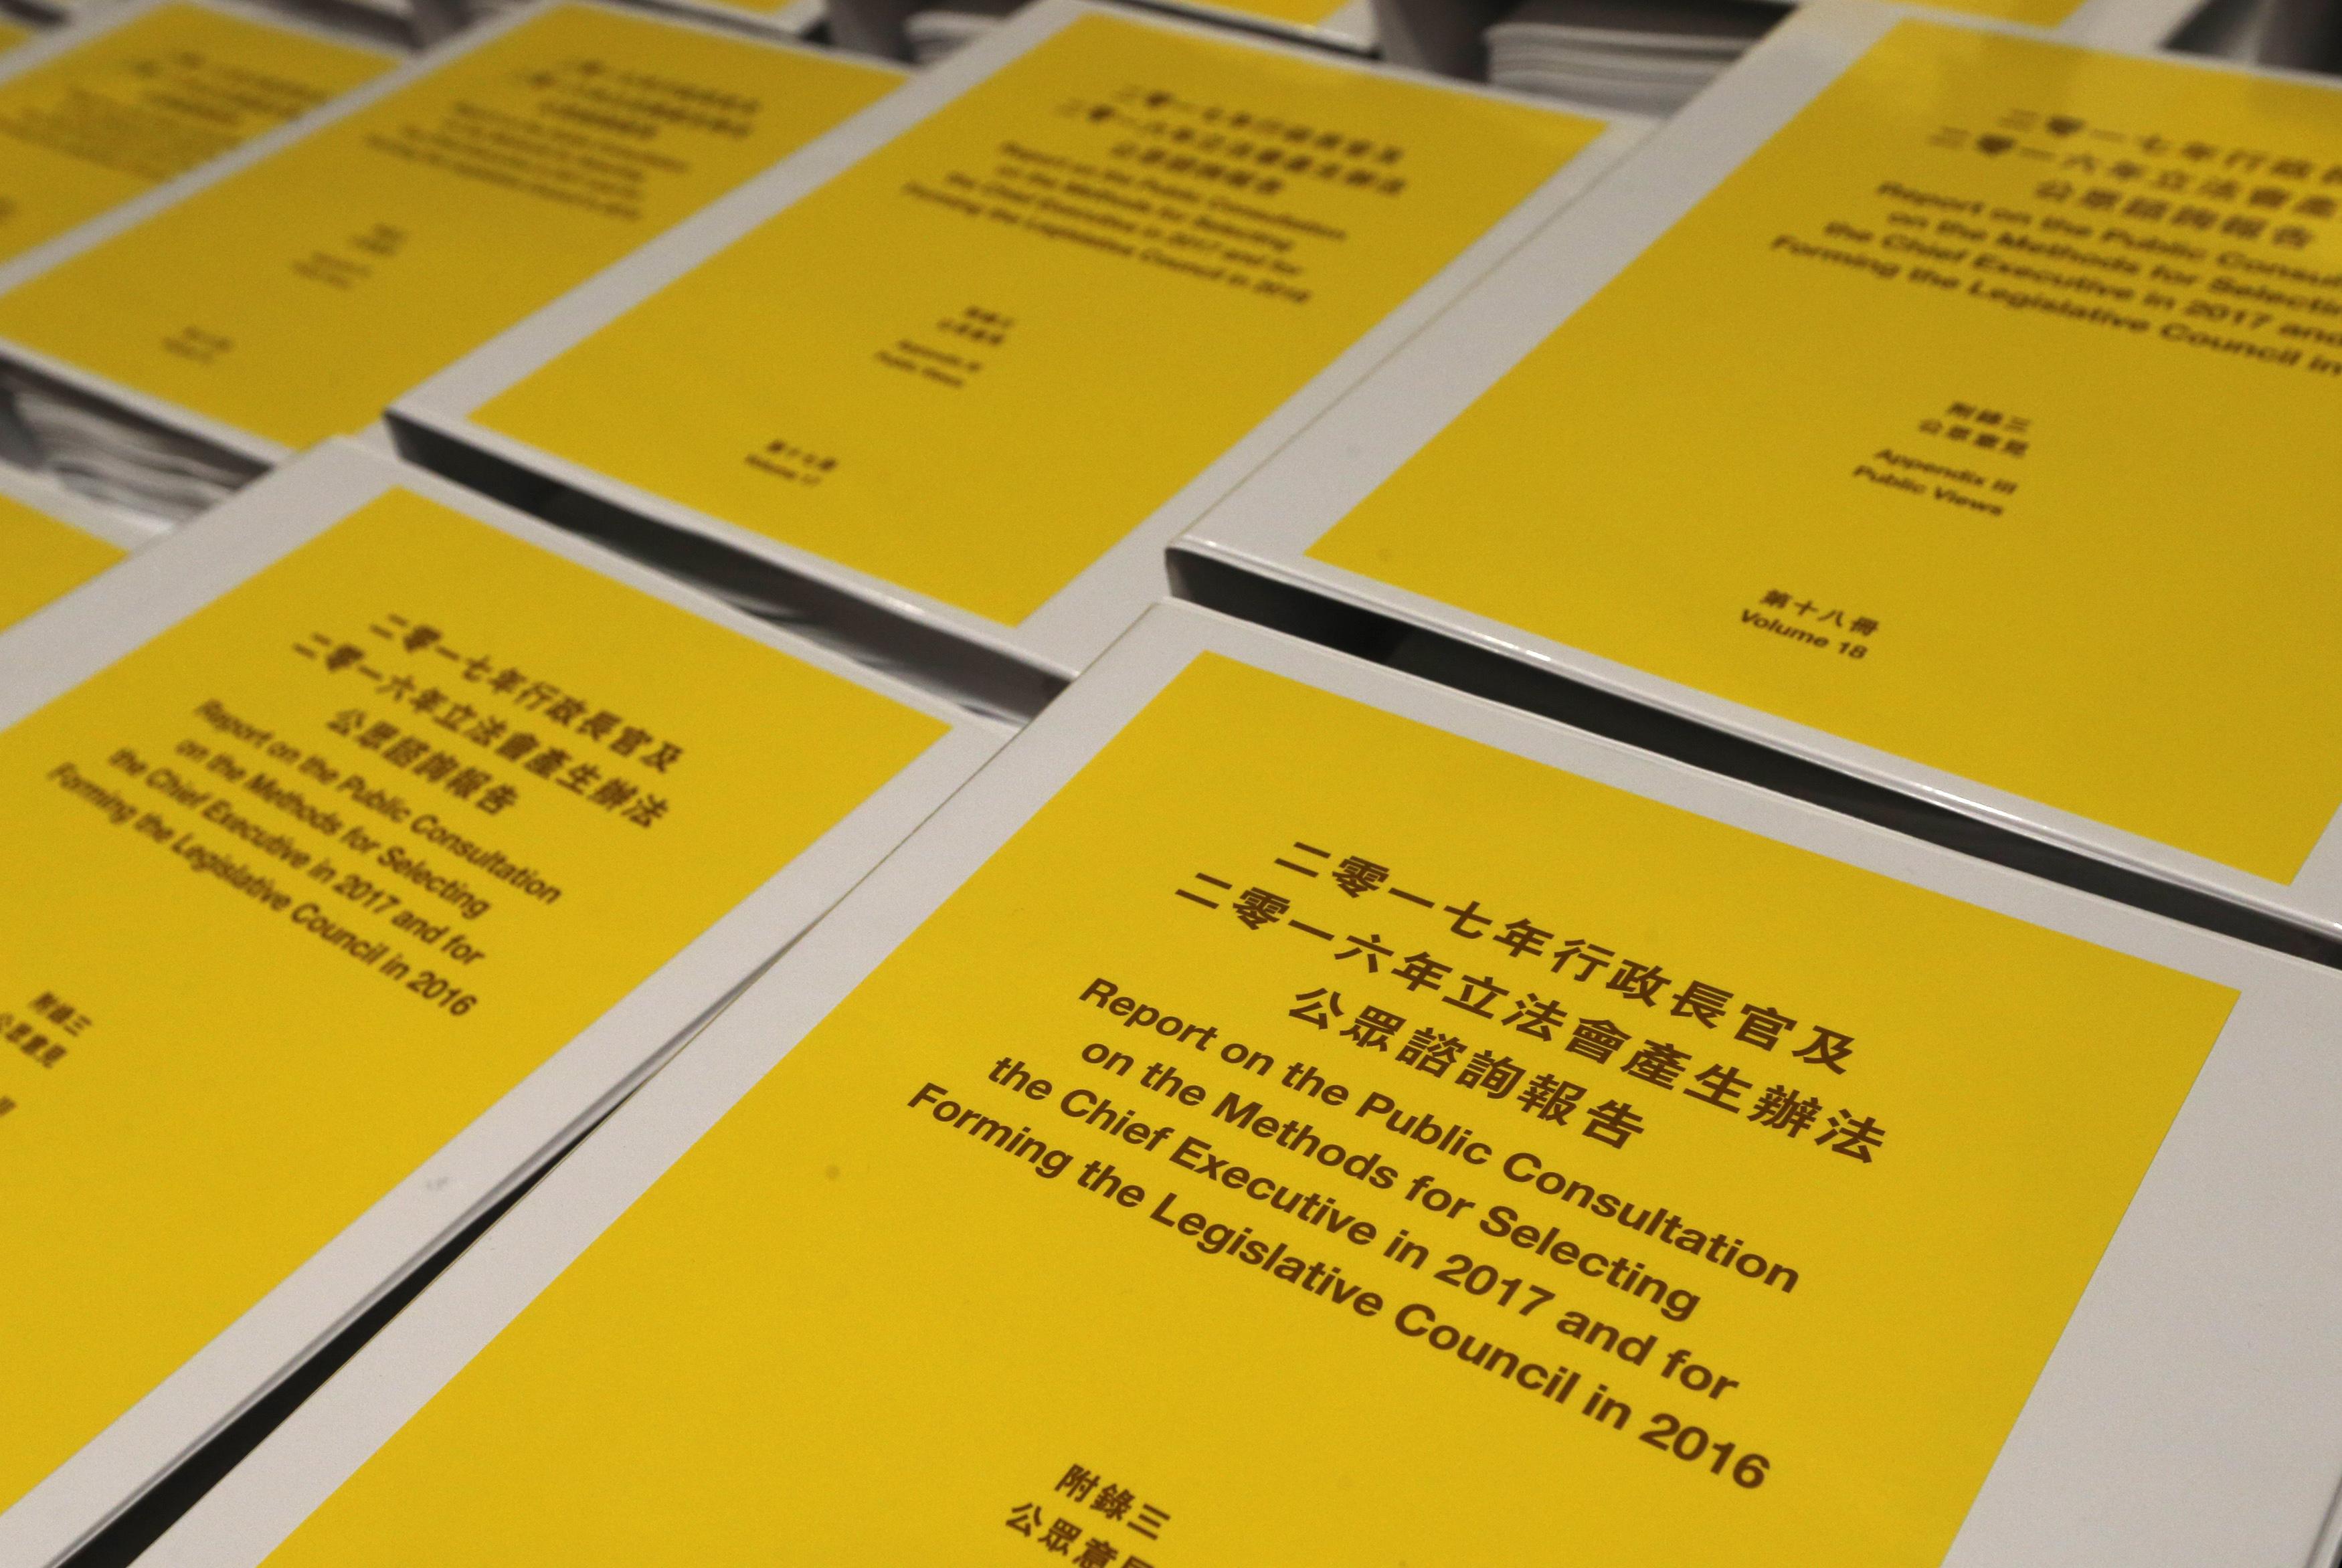 Policy papers and public speeches that are primarily intended for a local audience are originally drafted in Chinese, with an English translation that may carry less weight. Photo: Reuters